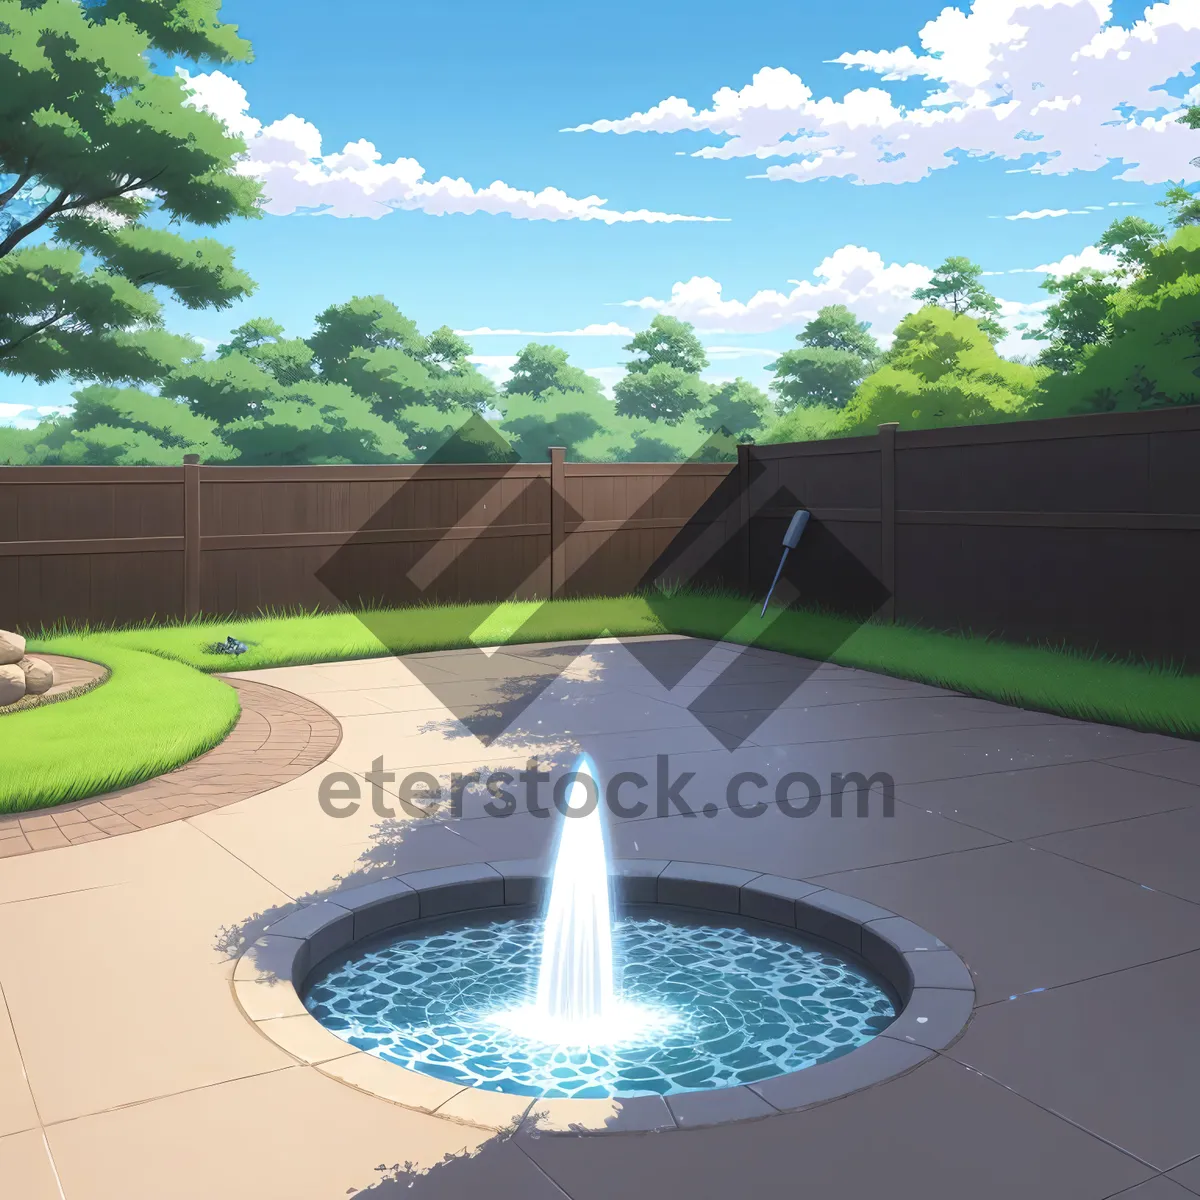 Picture of Summer Golf Course Sundial by the Fountain